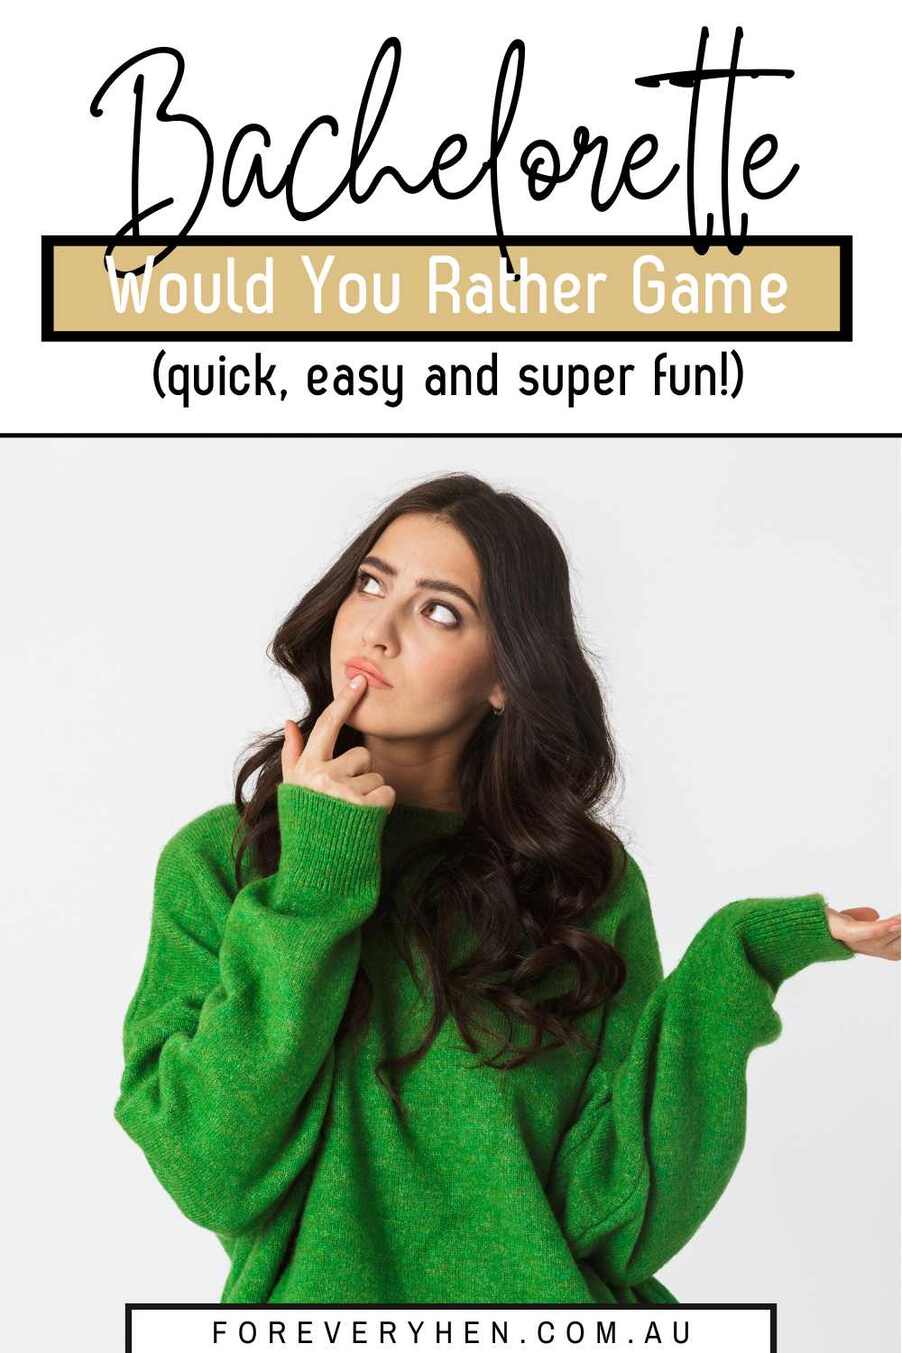 Image of a woman thinking. Text overlay: Bachelorette would you rather game (quick, easy and super fun!)